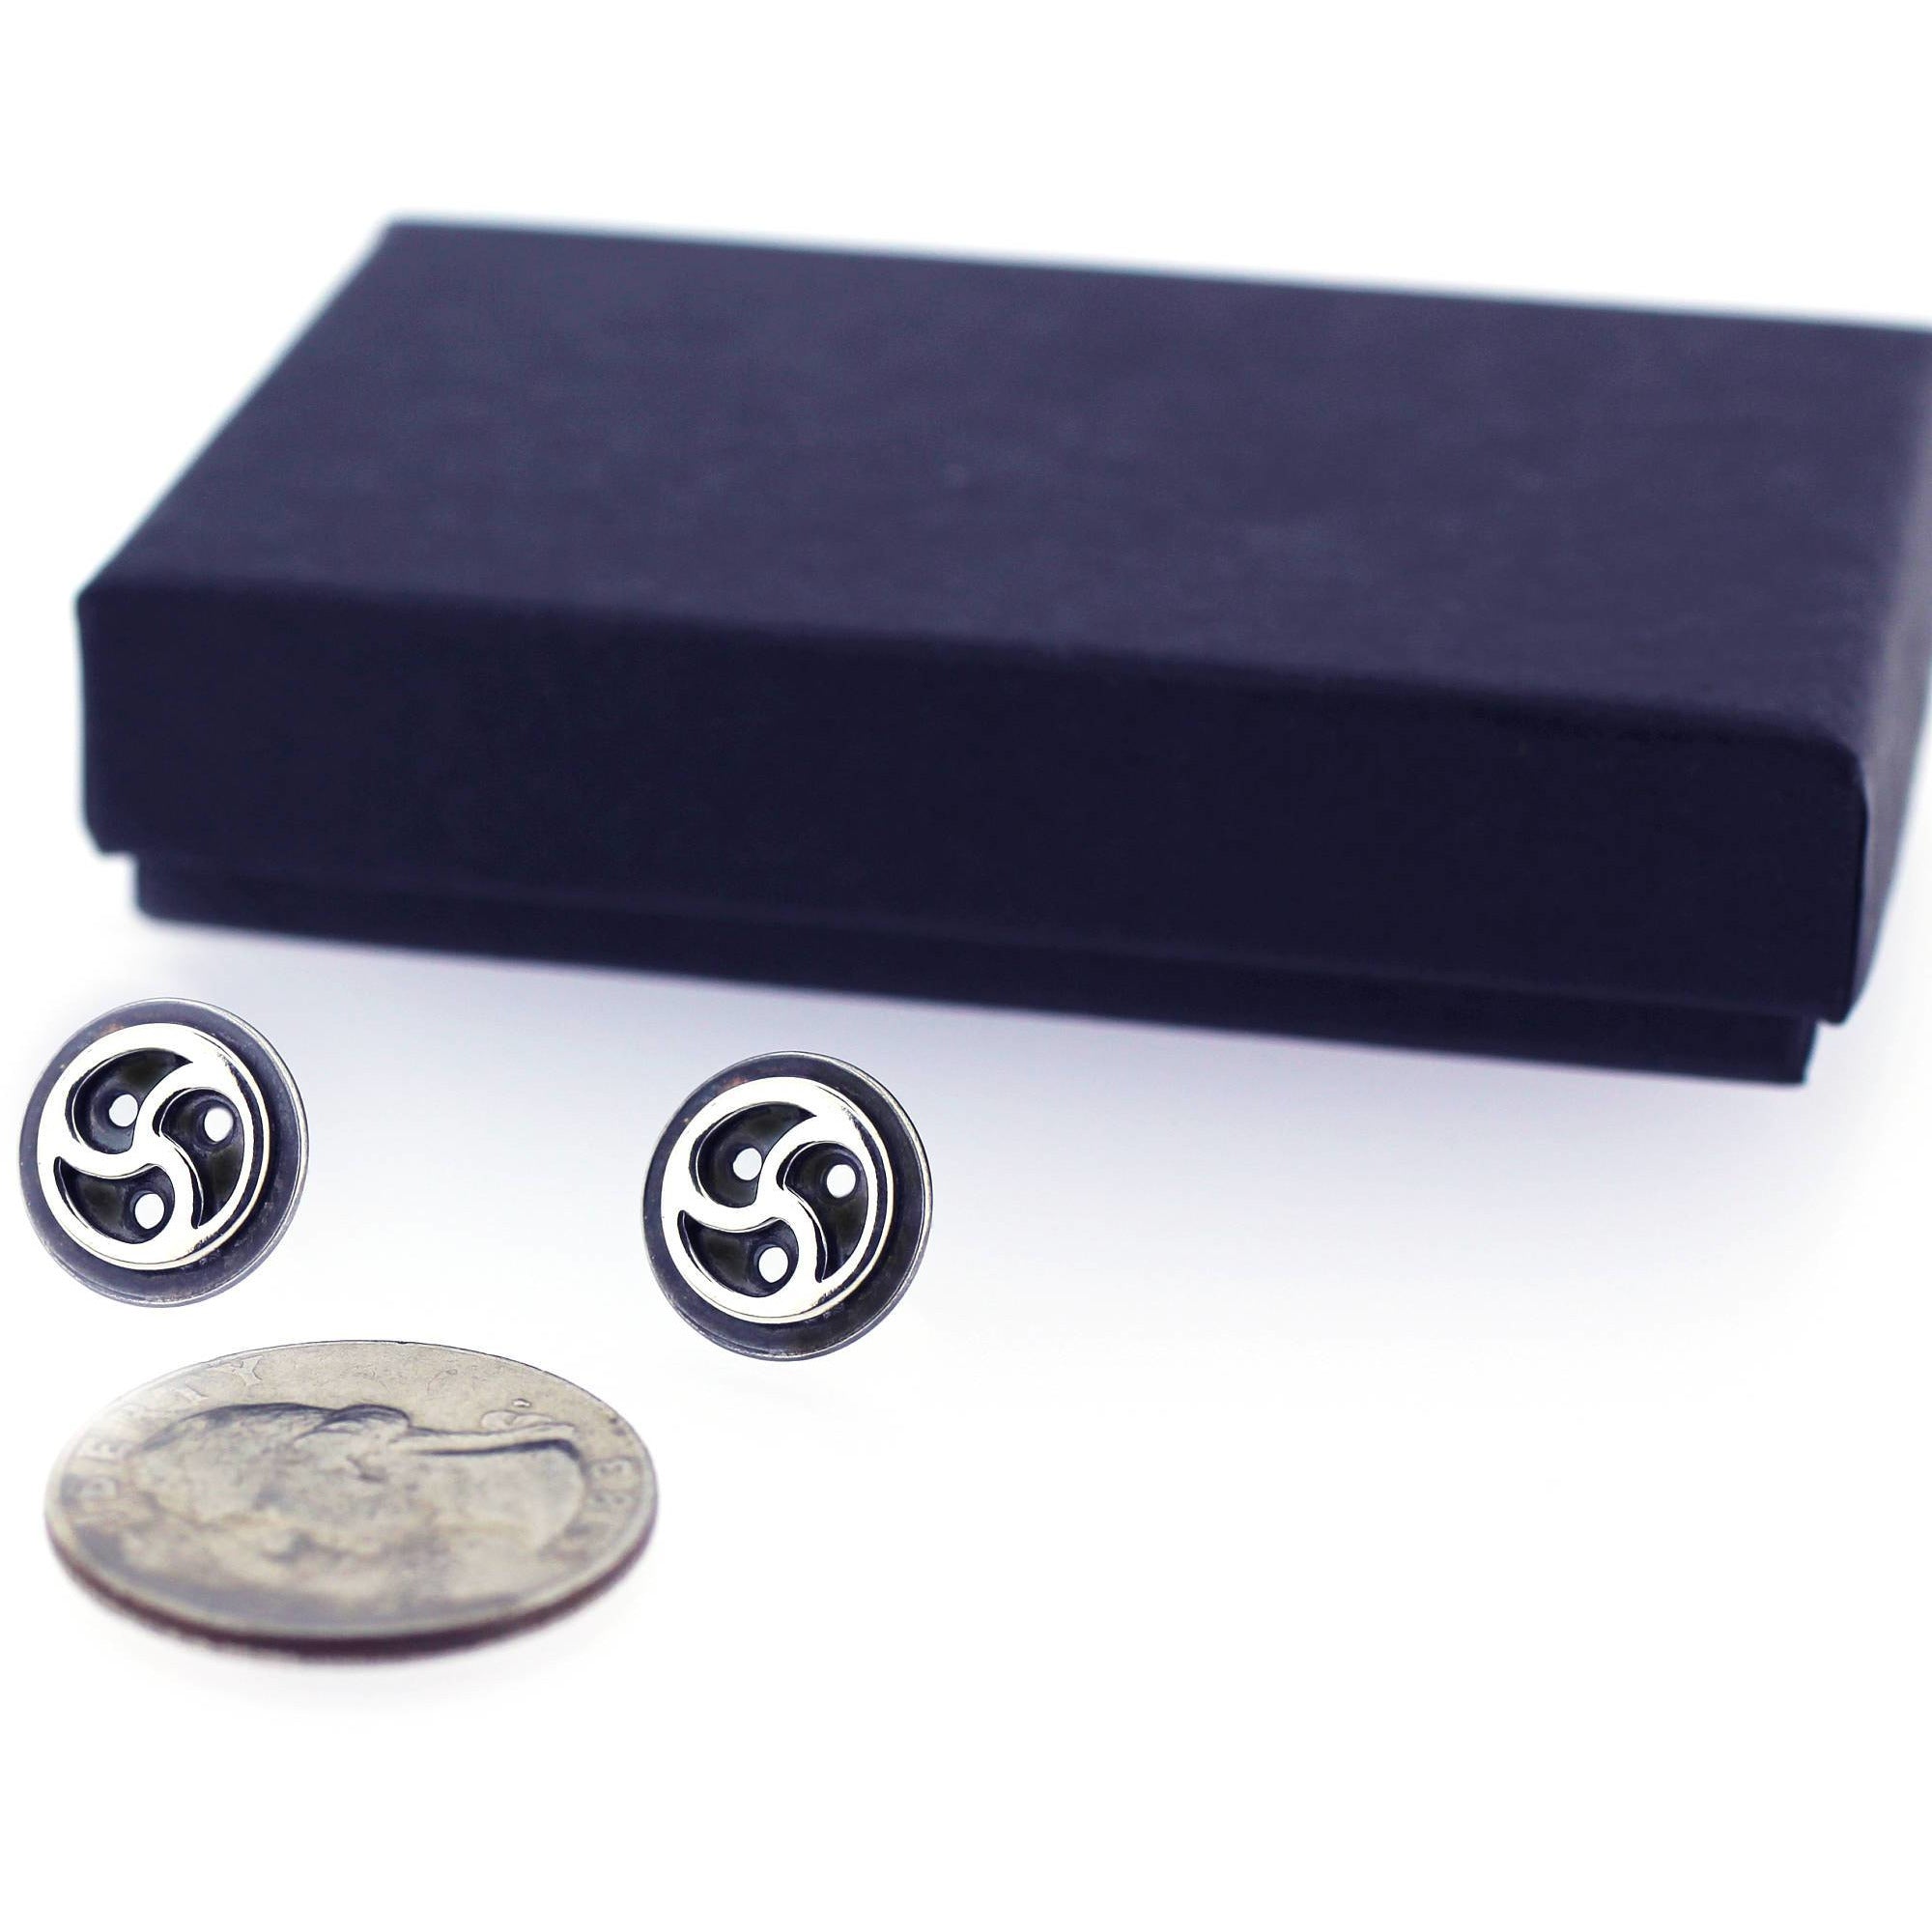 Handcrafted Sterling Silver BDSM Symbol Earrings - Triskele Design for Style and Symbolism